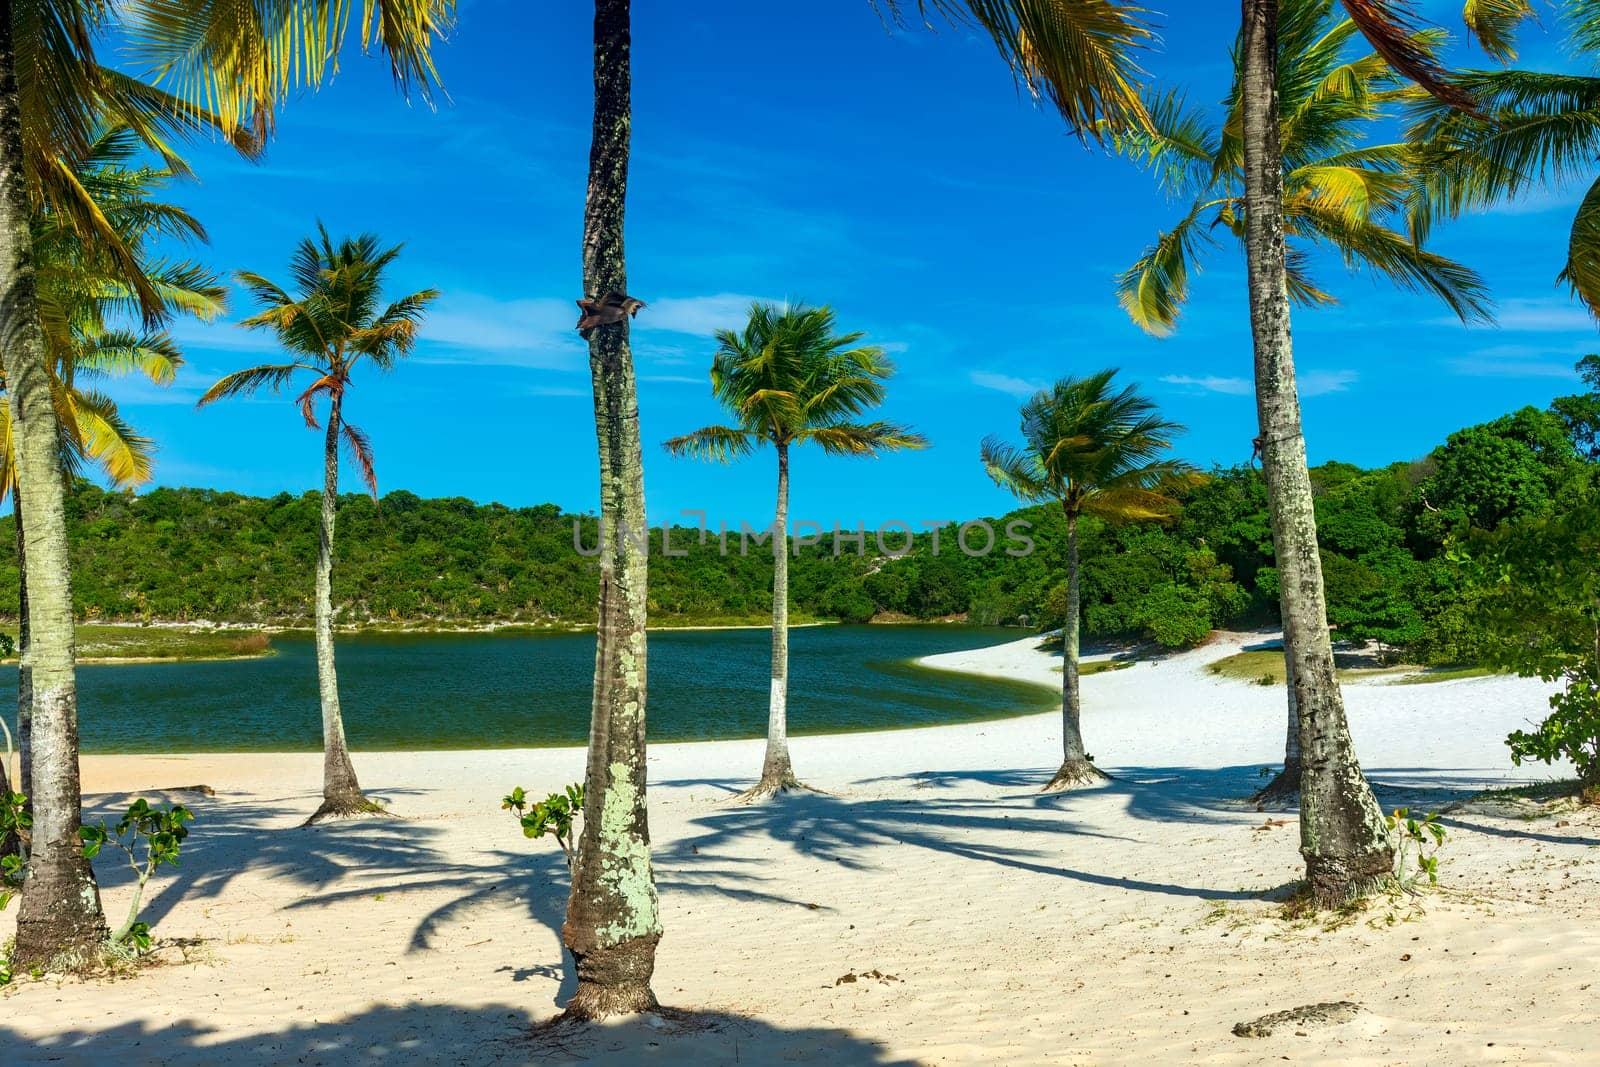 Famous Abaete lagoon in Salvador in Bahia with its coconut trees, white sands and dark water surrounded by vegetation